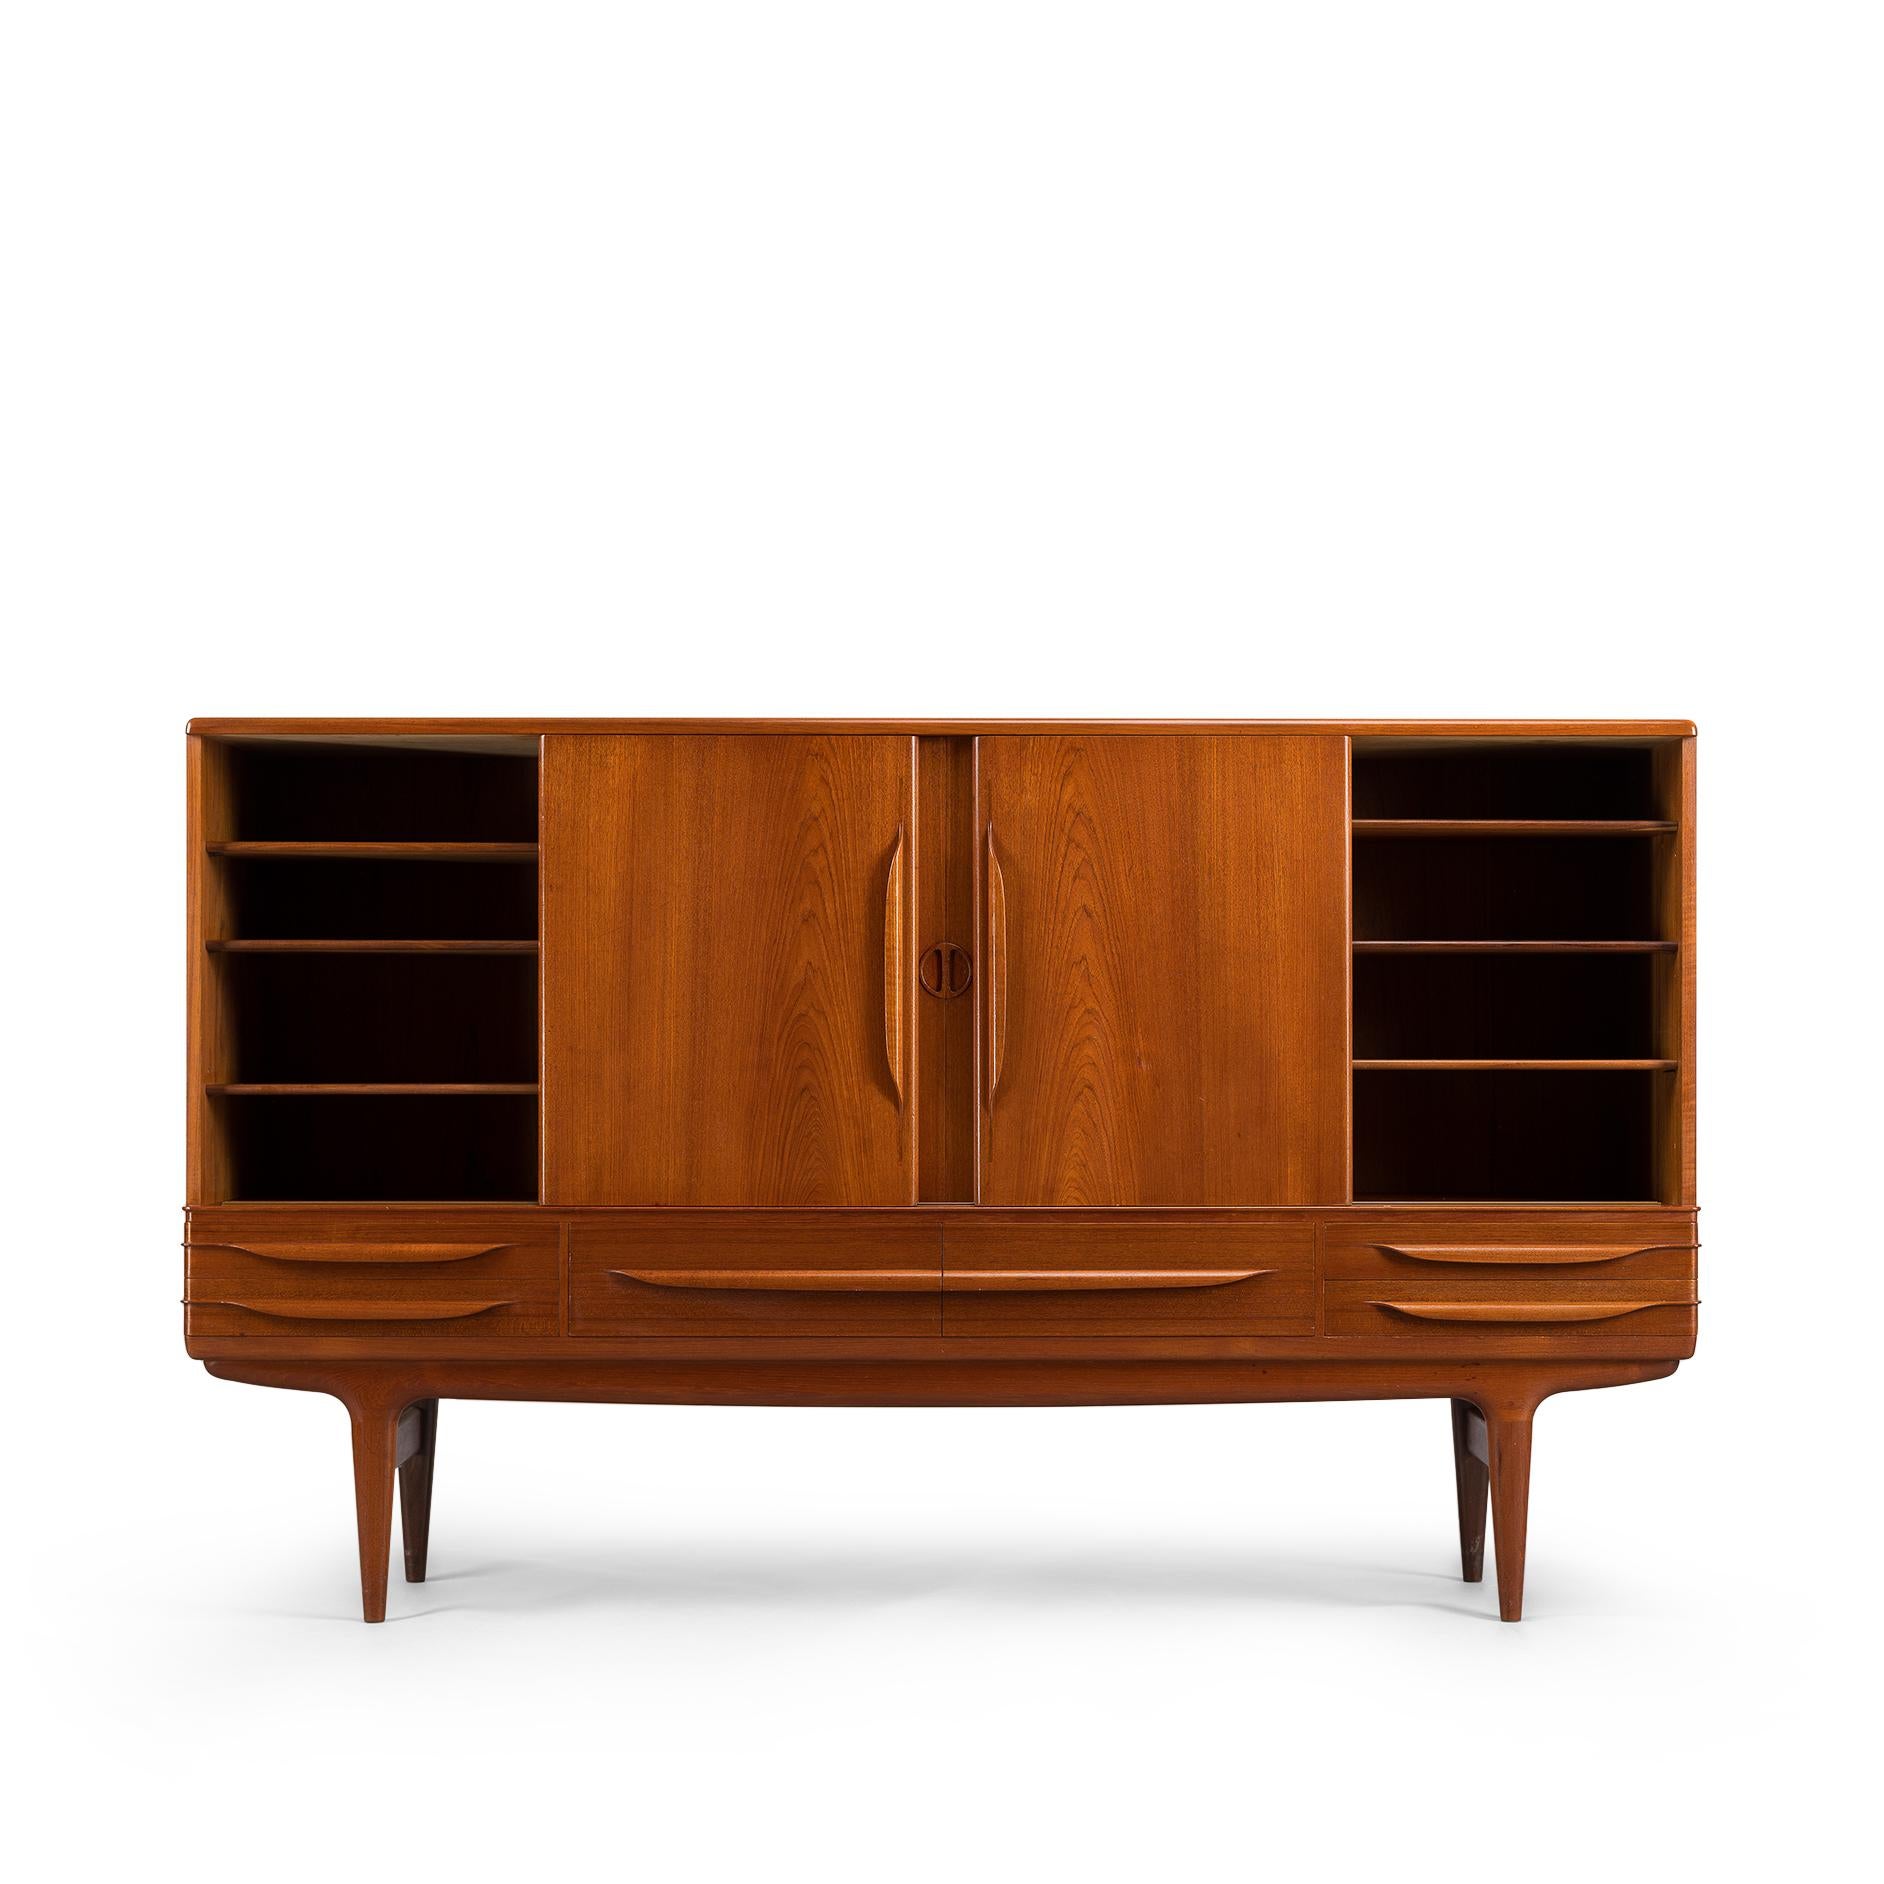 Rare and beautiful Scandinavian teak credenza model UM 14 by Uldum Møbelfabrik designed by Johannes Andersen. This particular model is an early sixties credenza expressing superb woodworking craftsmanship. Coming through very organically typical for